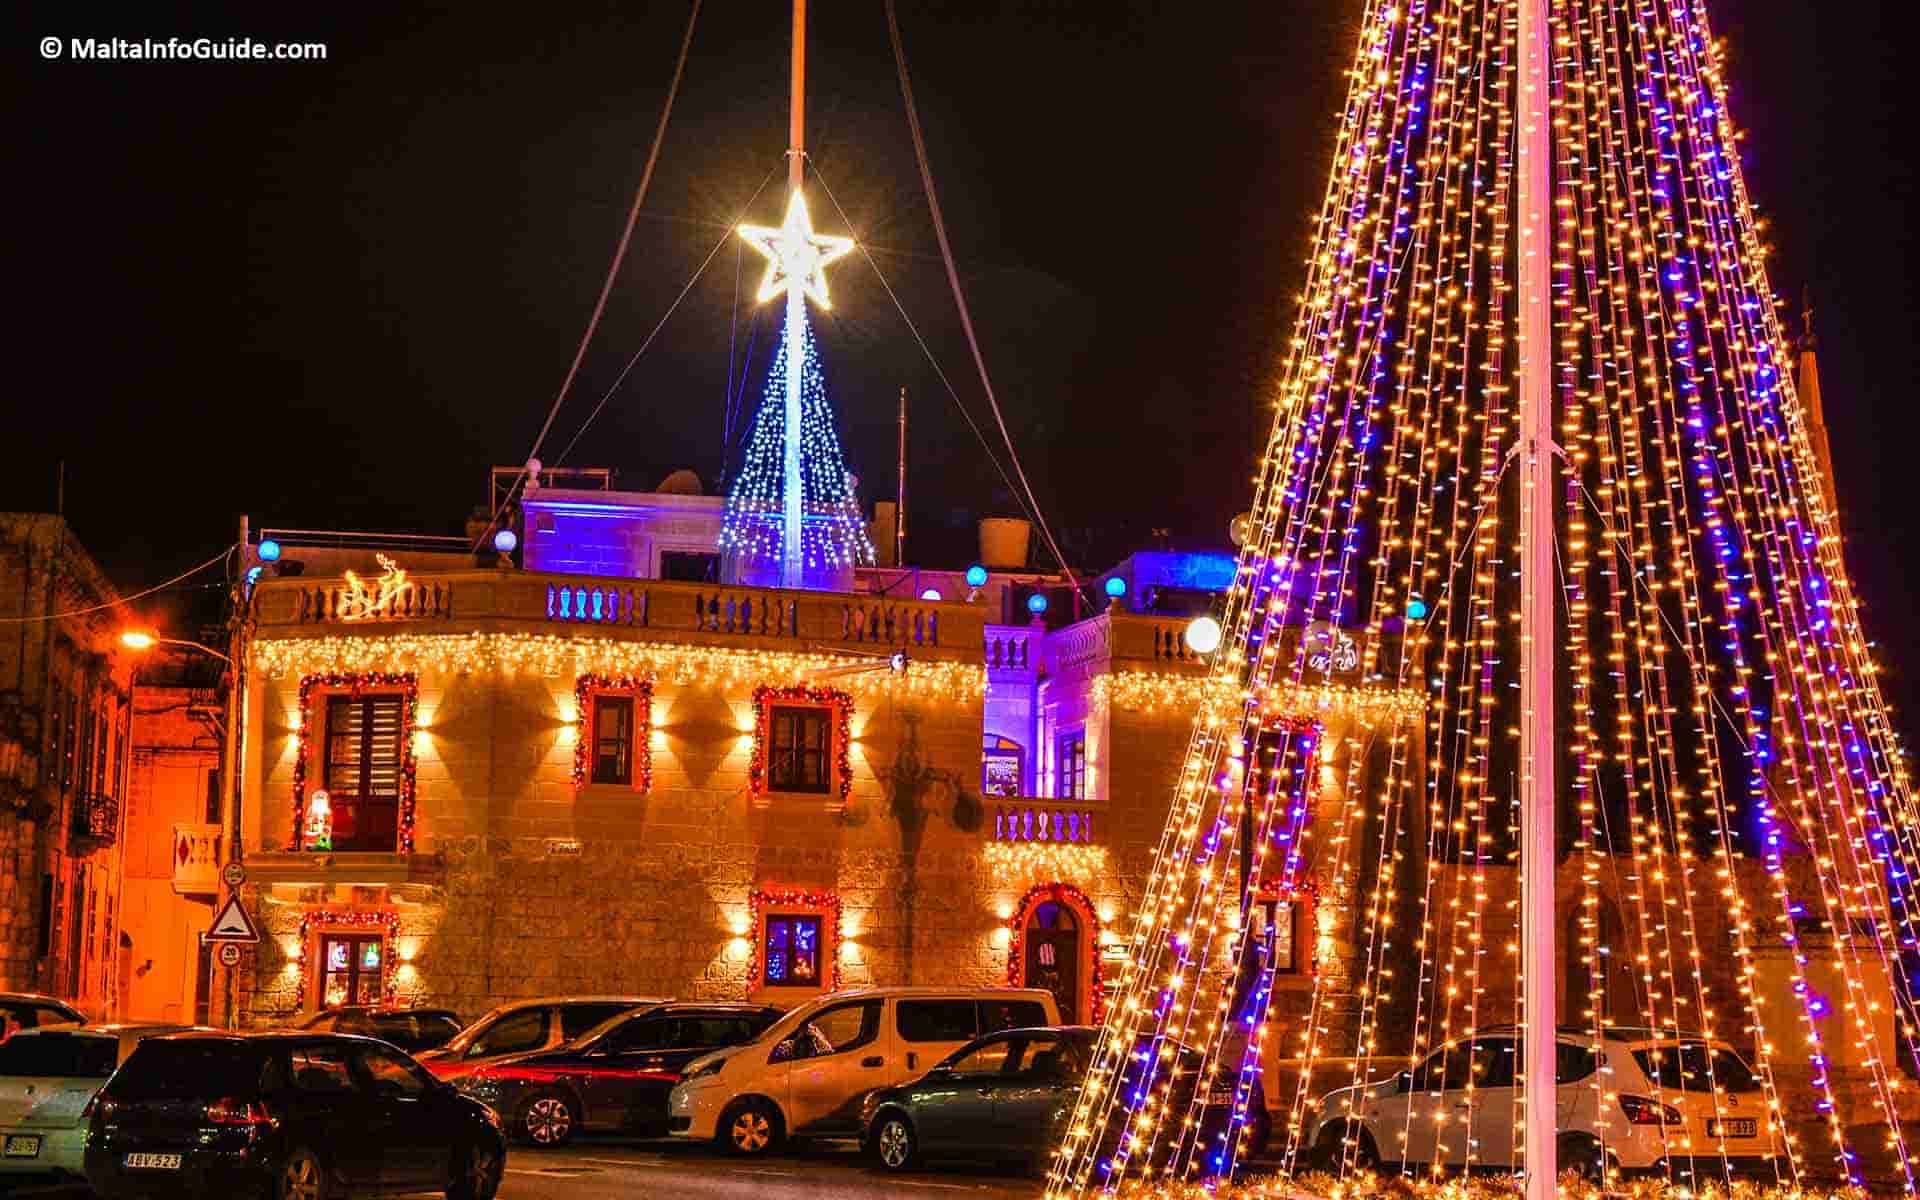 A decorated house with a Christmas tree in the heart of Lija village Malta.